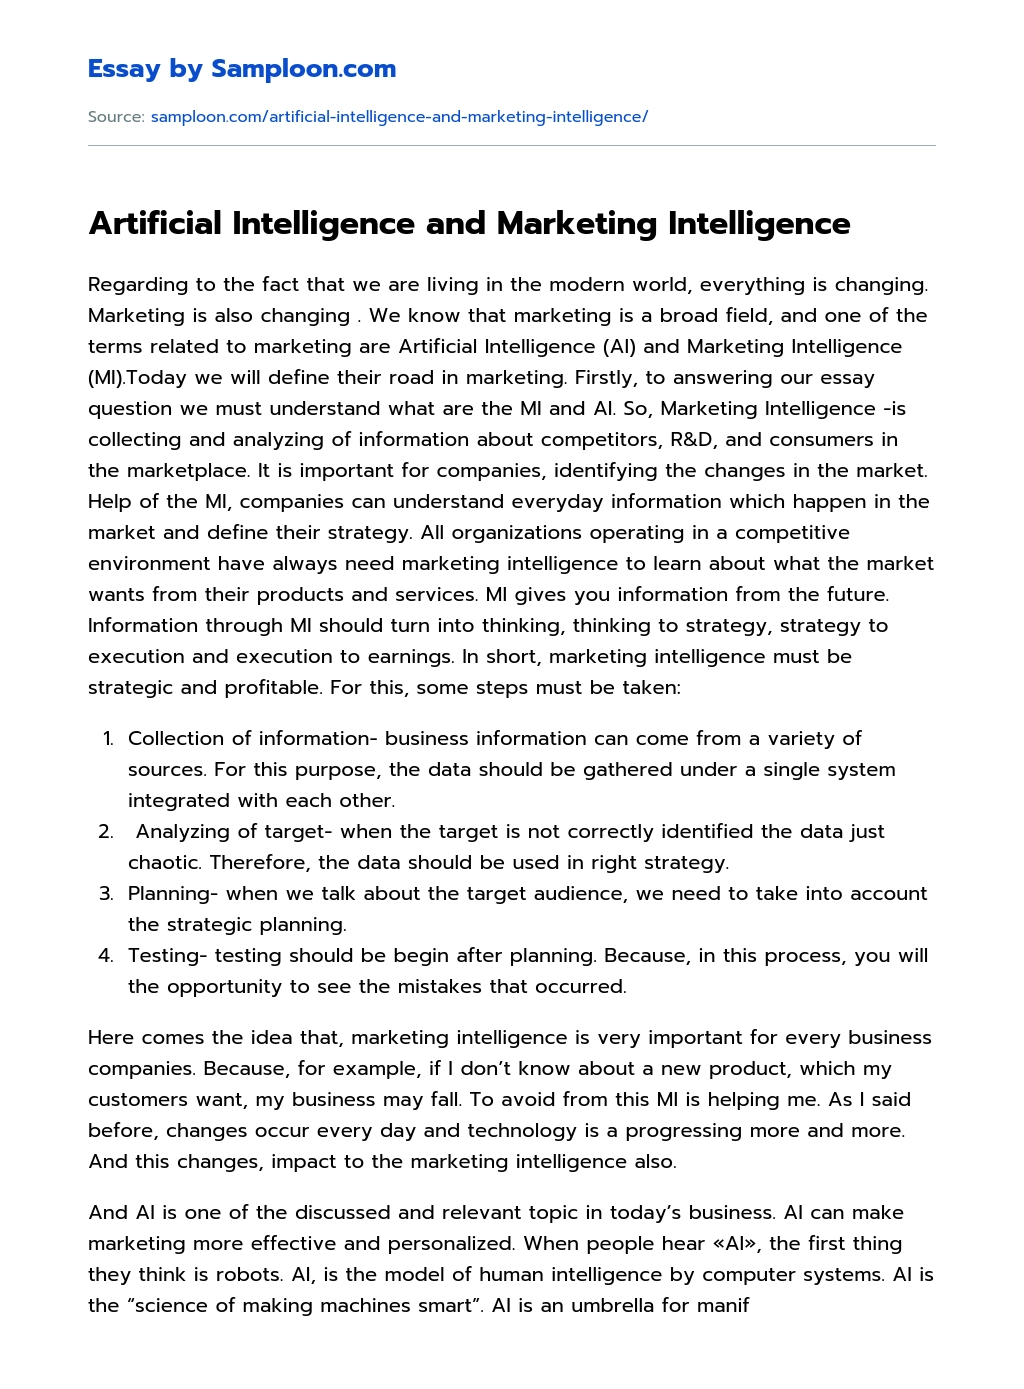 Artificial Intelligence and Marketing Intelligence Research Paper essay